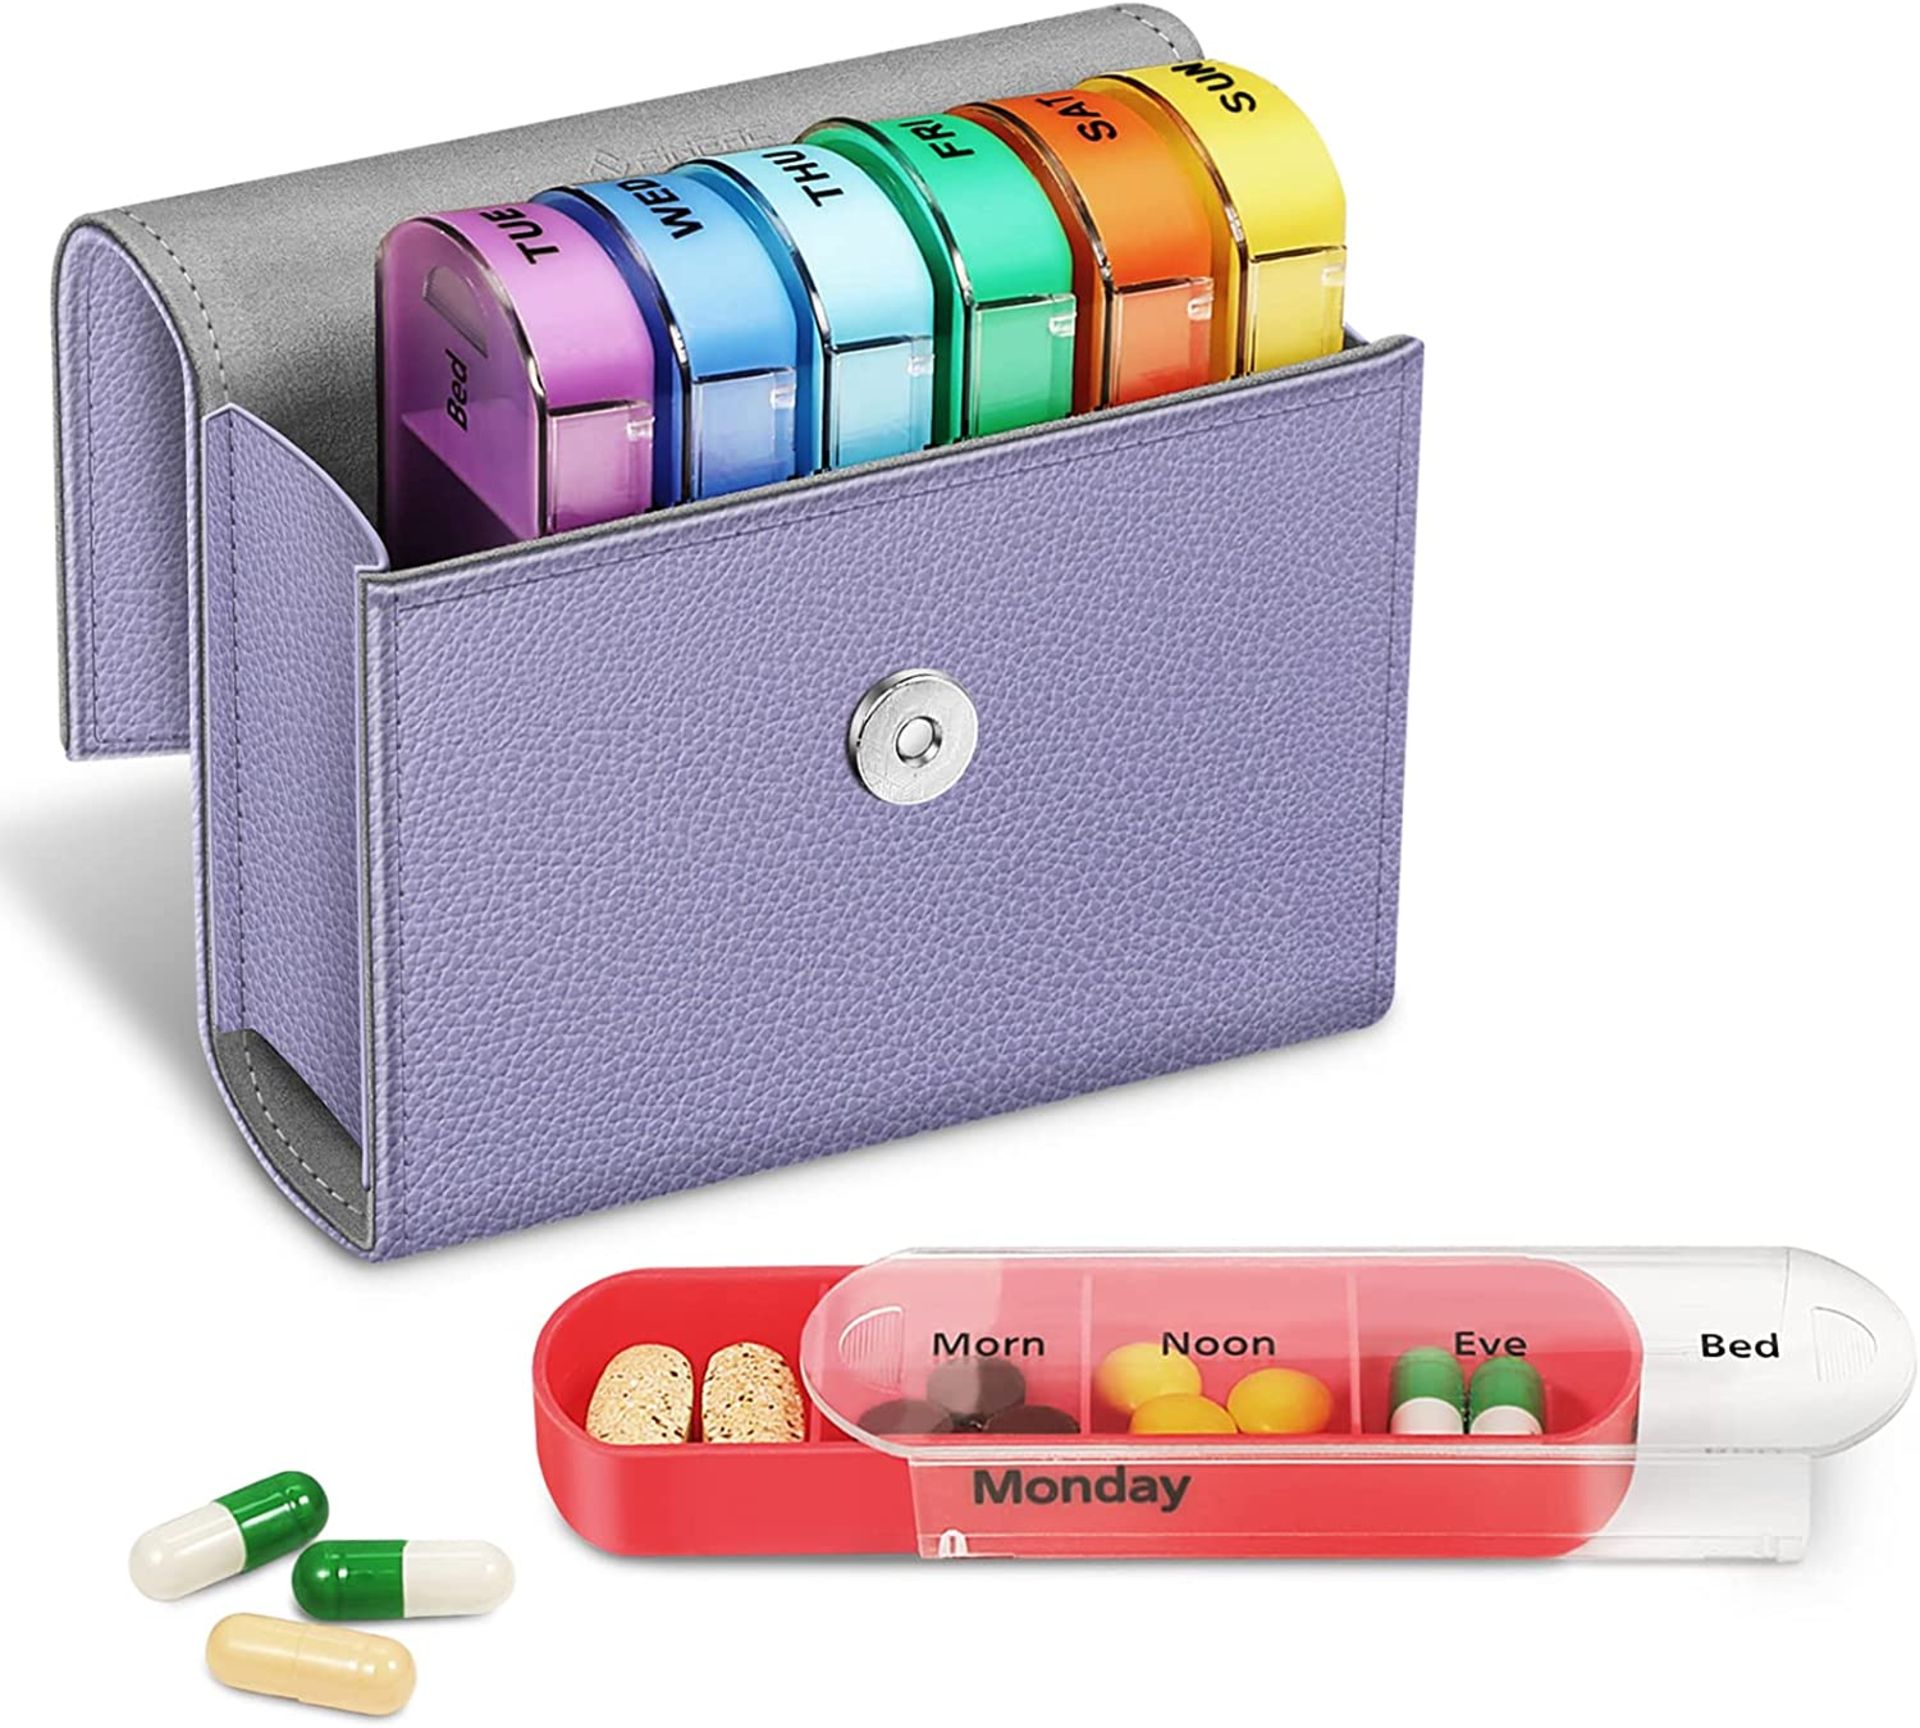 RP £28 Set of 2 x FINPAC 7 Day Pill Organisers Box 4 Times A Day with PU Leather Case, Slide Open - Image 2 of 3